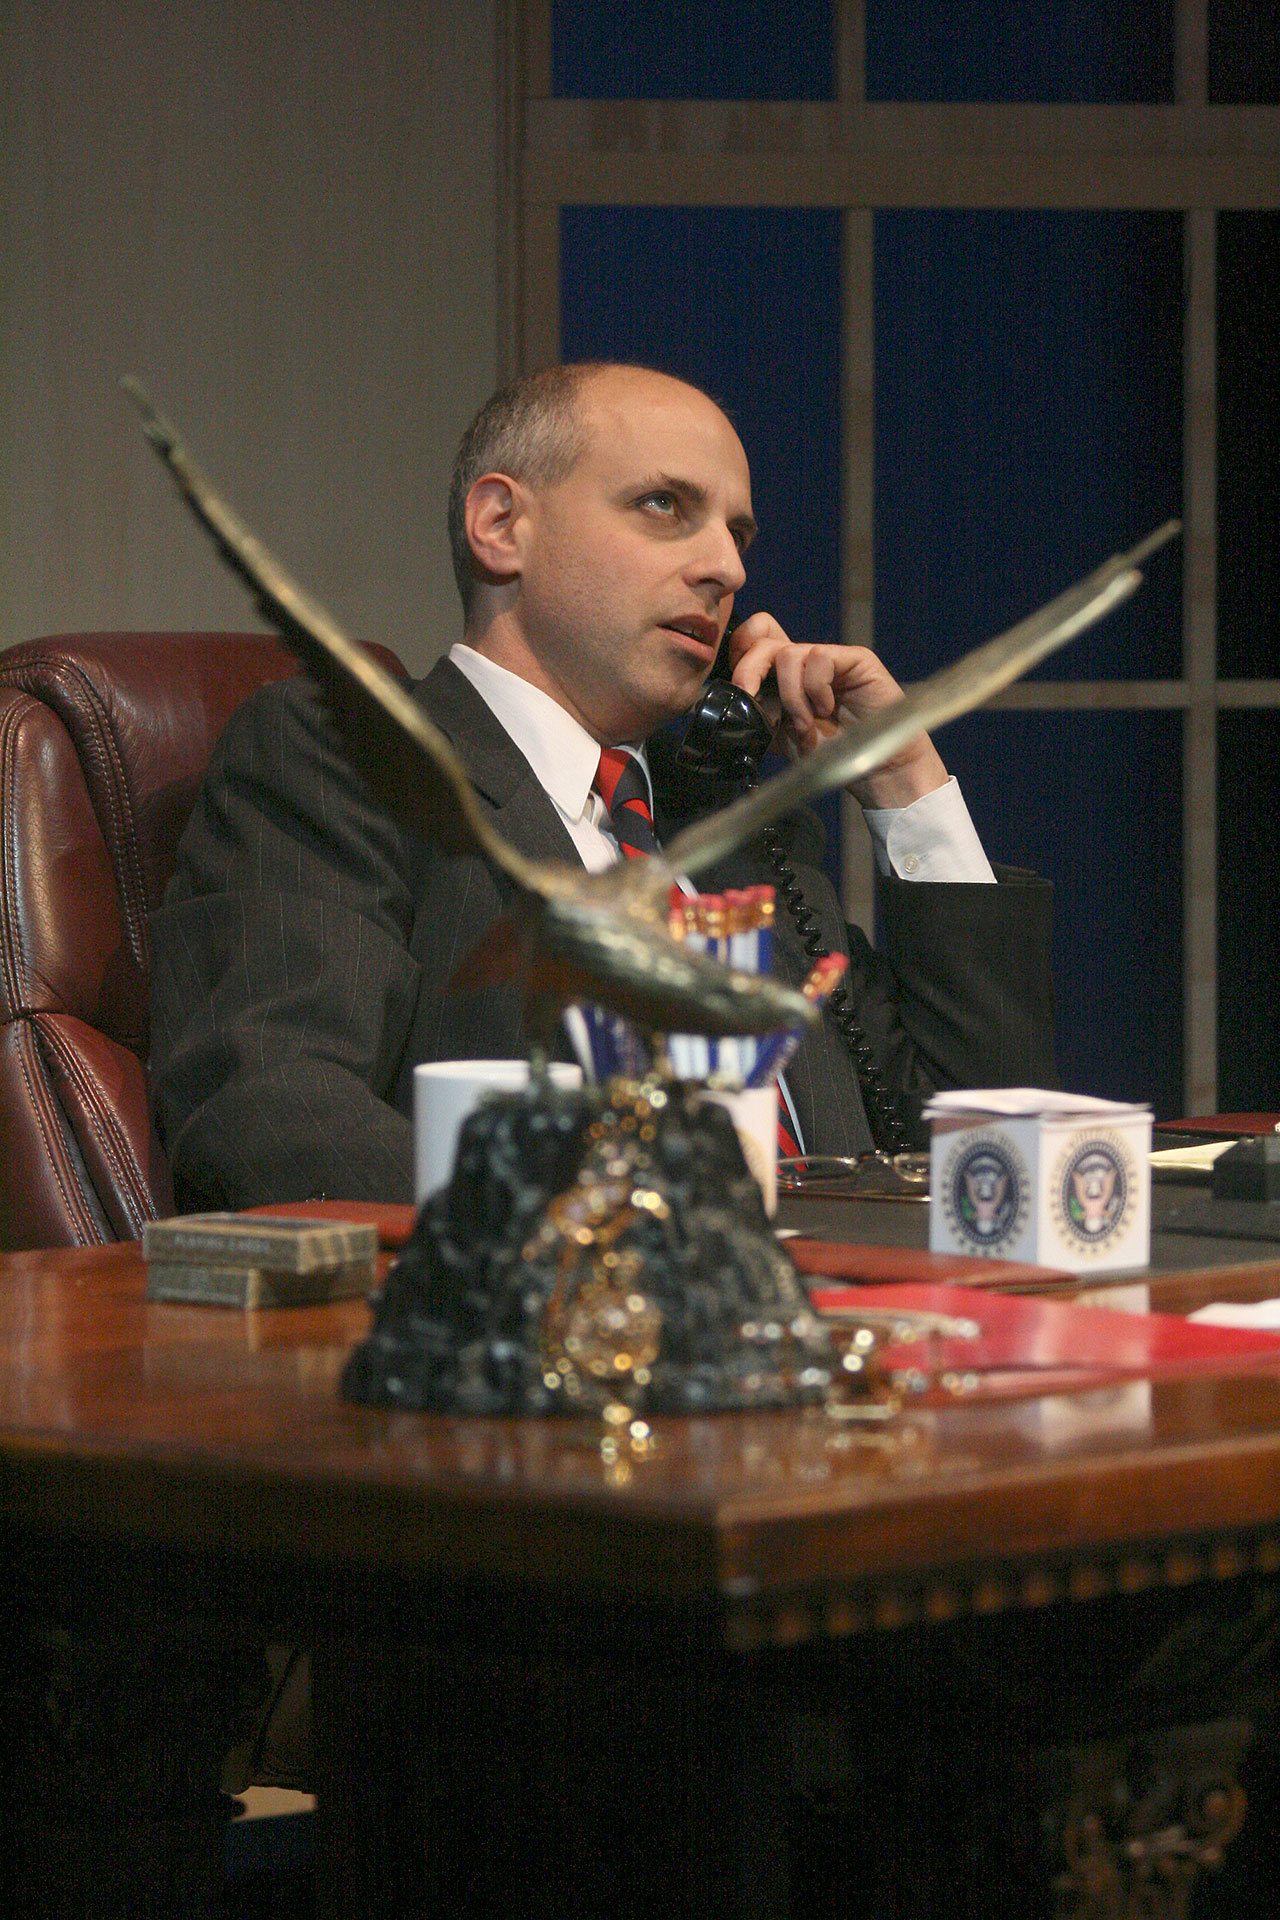 President Charles Smith rolls his eyes as he argues with one of his colleagues on the phone.